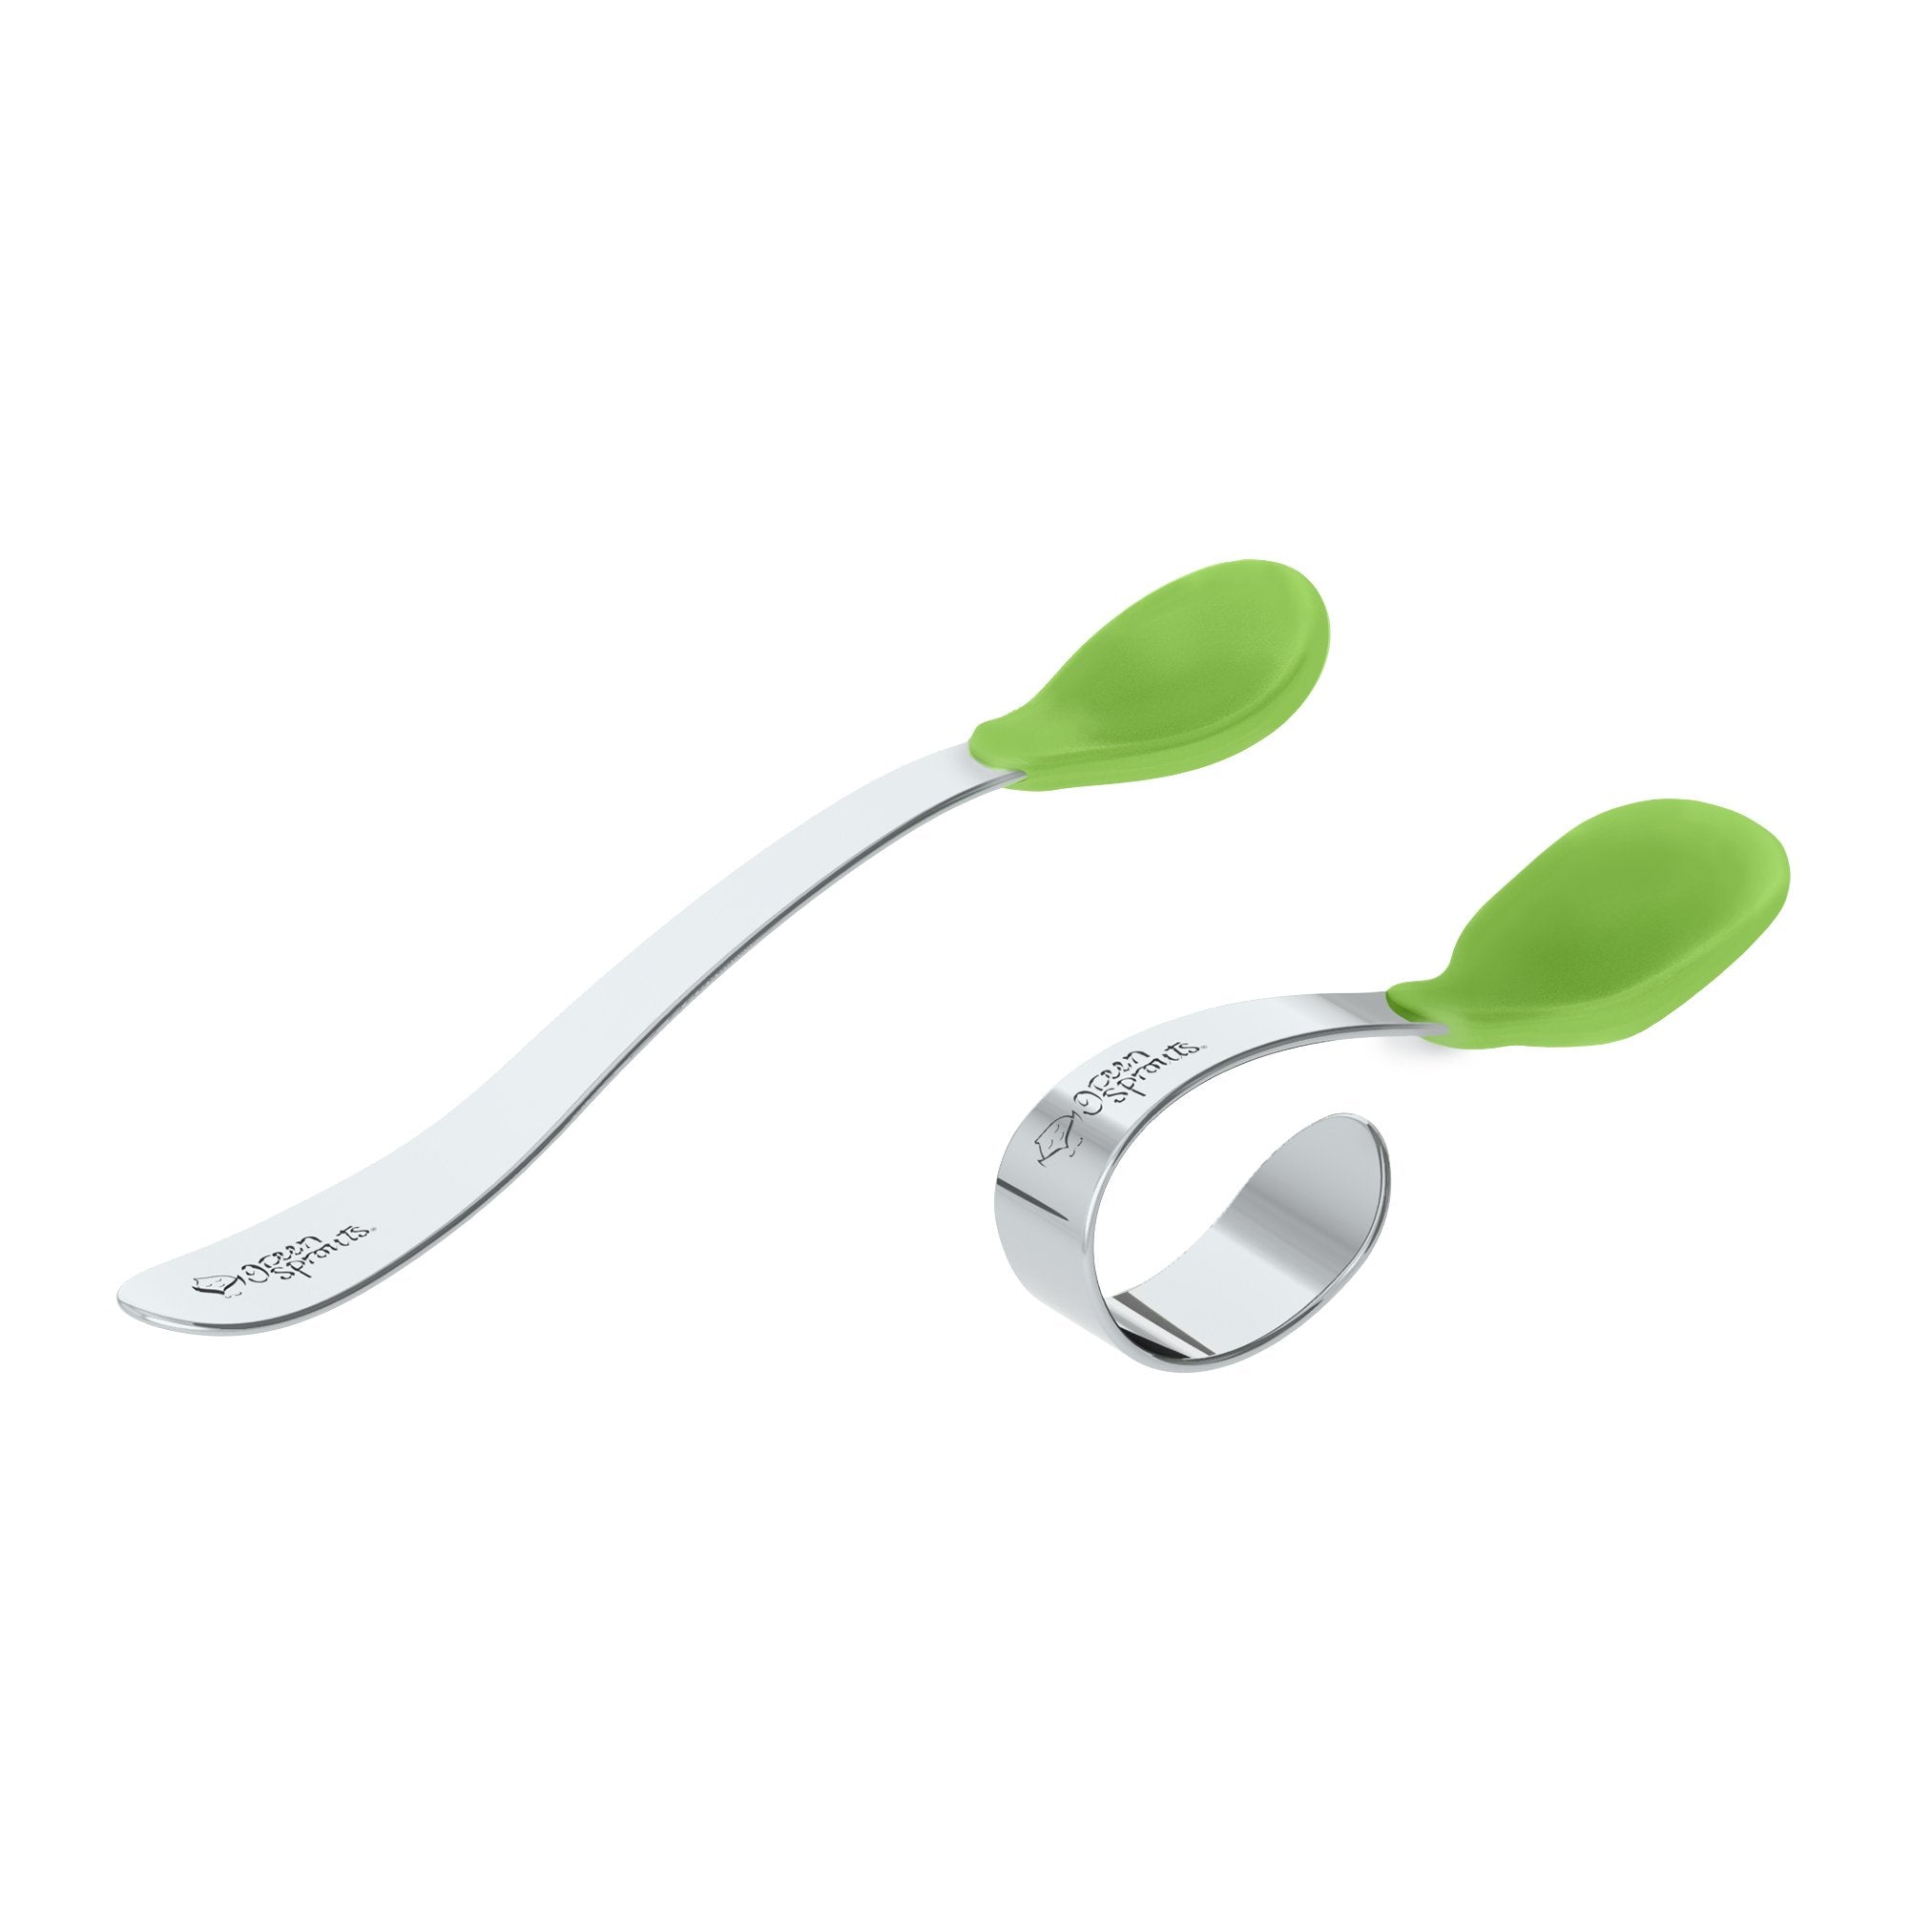 Silicone Baby Spoons First Stage Infant Feeding Spoon For Boys And Girls,  Dishwasher-Safe Silicone Baby Feeding Set Soft Tip First Spoon Ergonomic